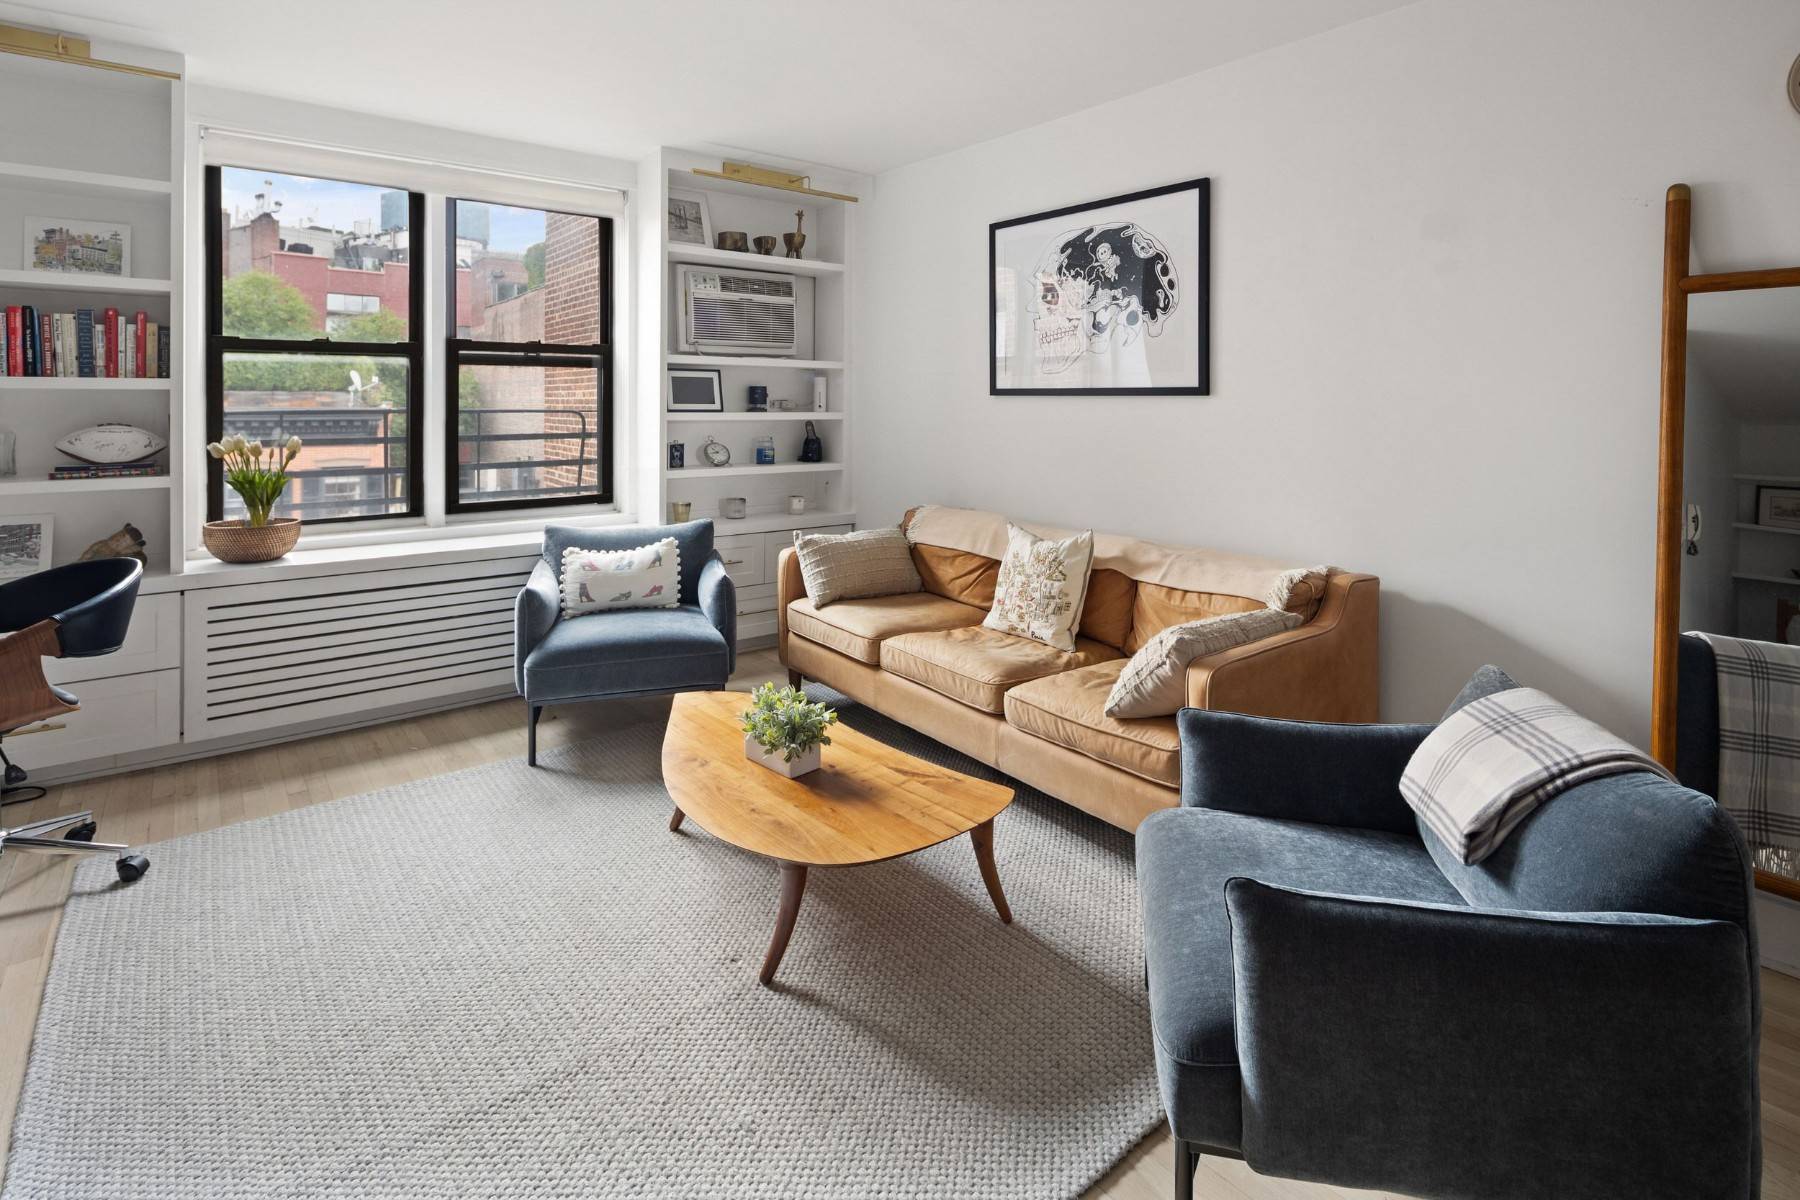 Bright and spacious alcove studio in the heart of the cherished West Village.